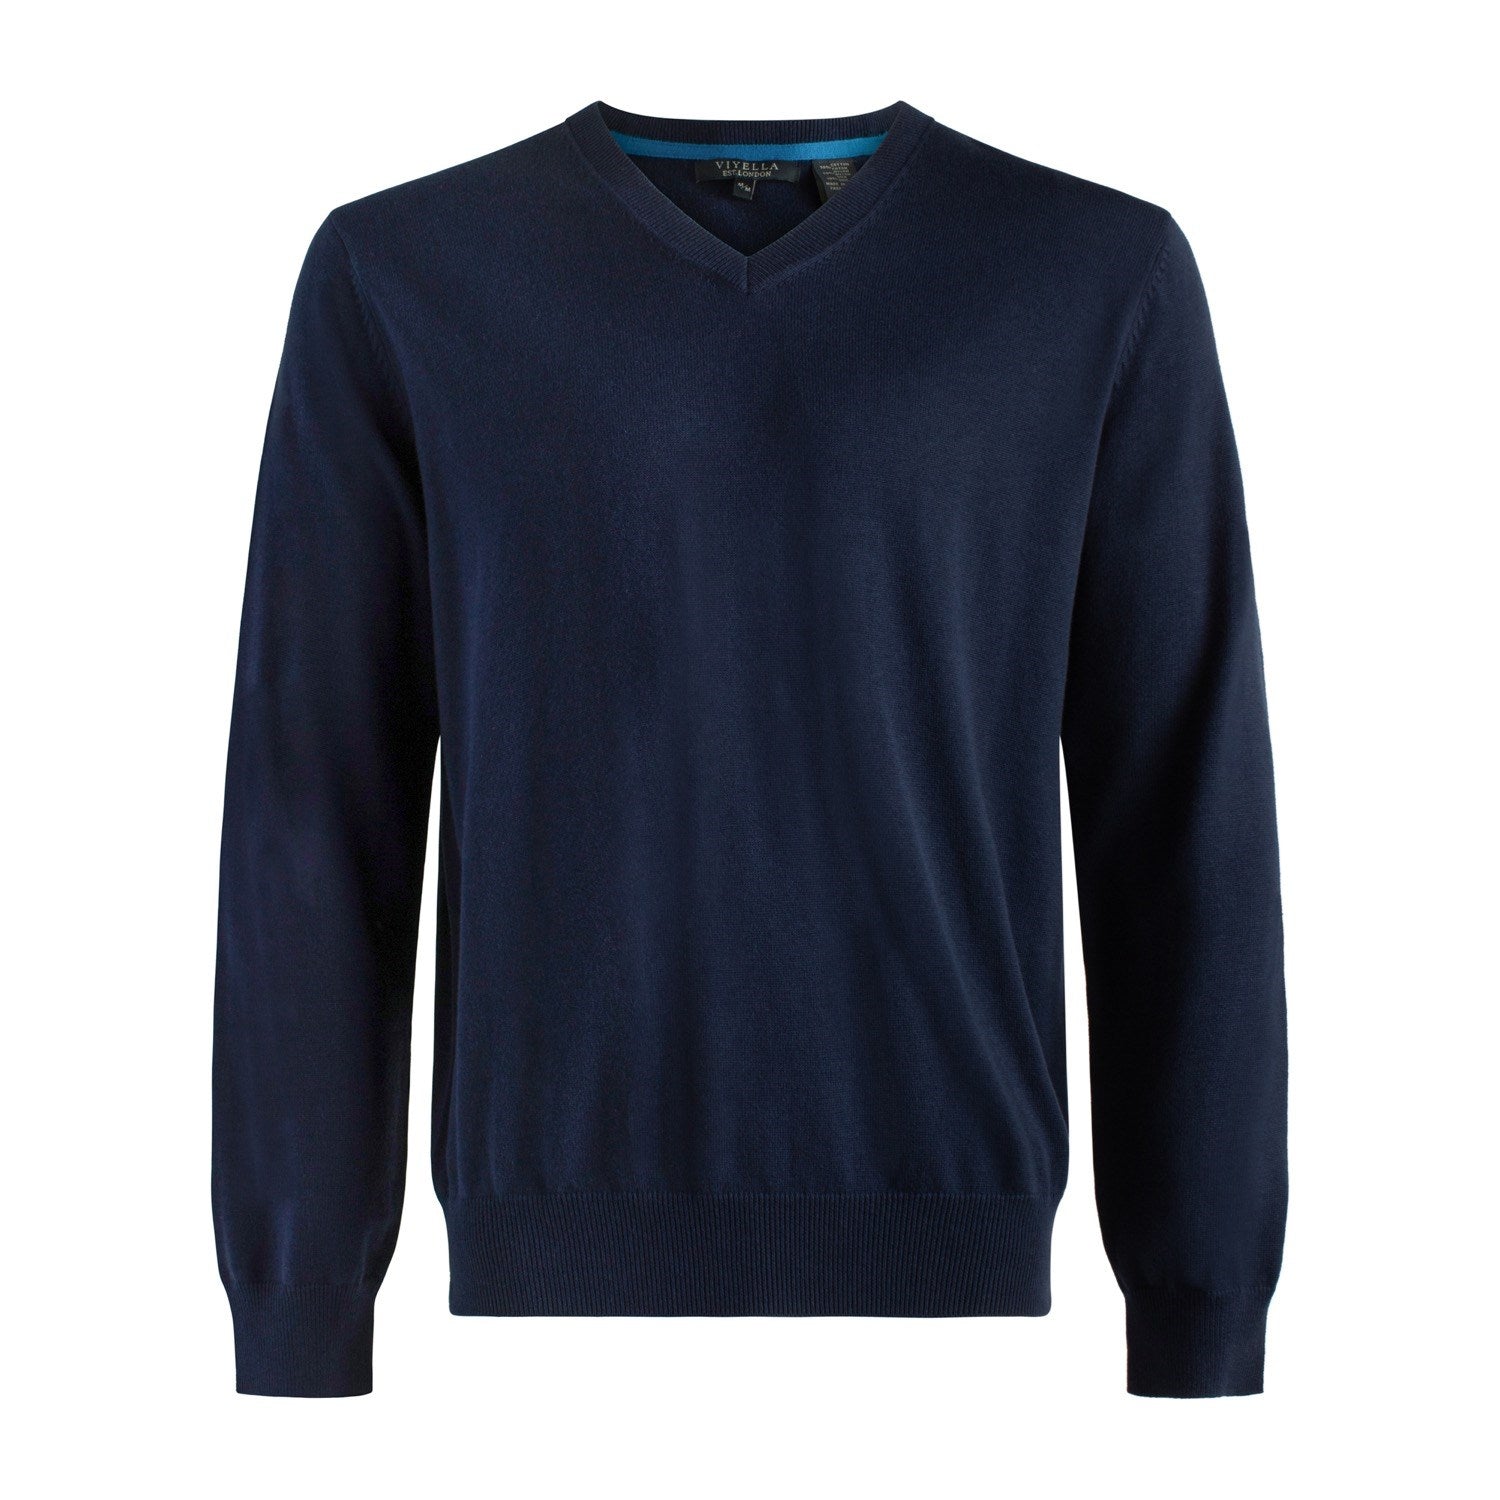 Cotton and Silk Blend Elbow Patch V-Neck Sweater in Navy by Viyella